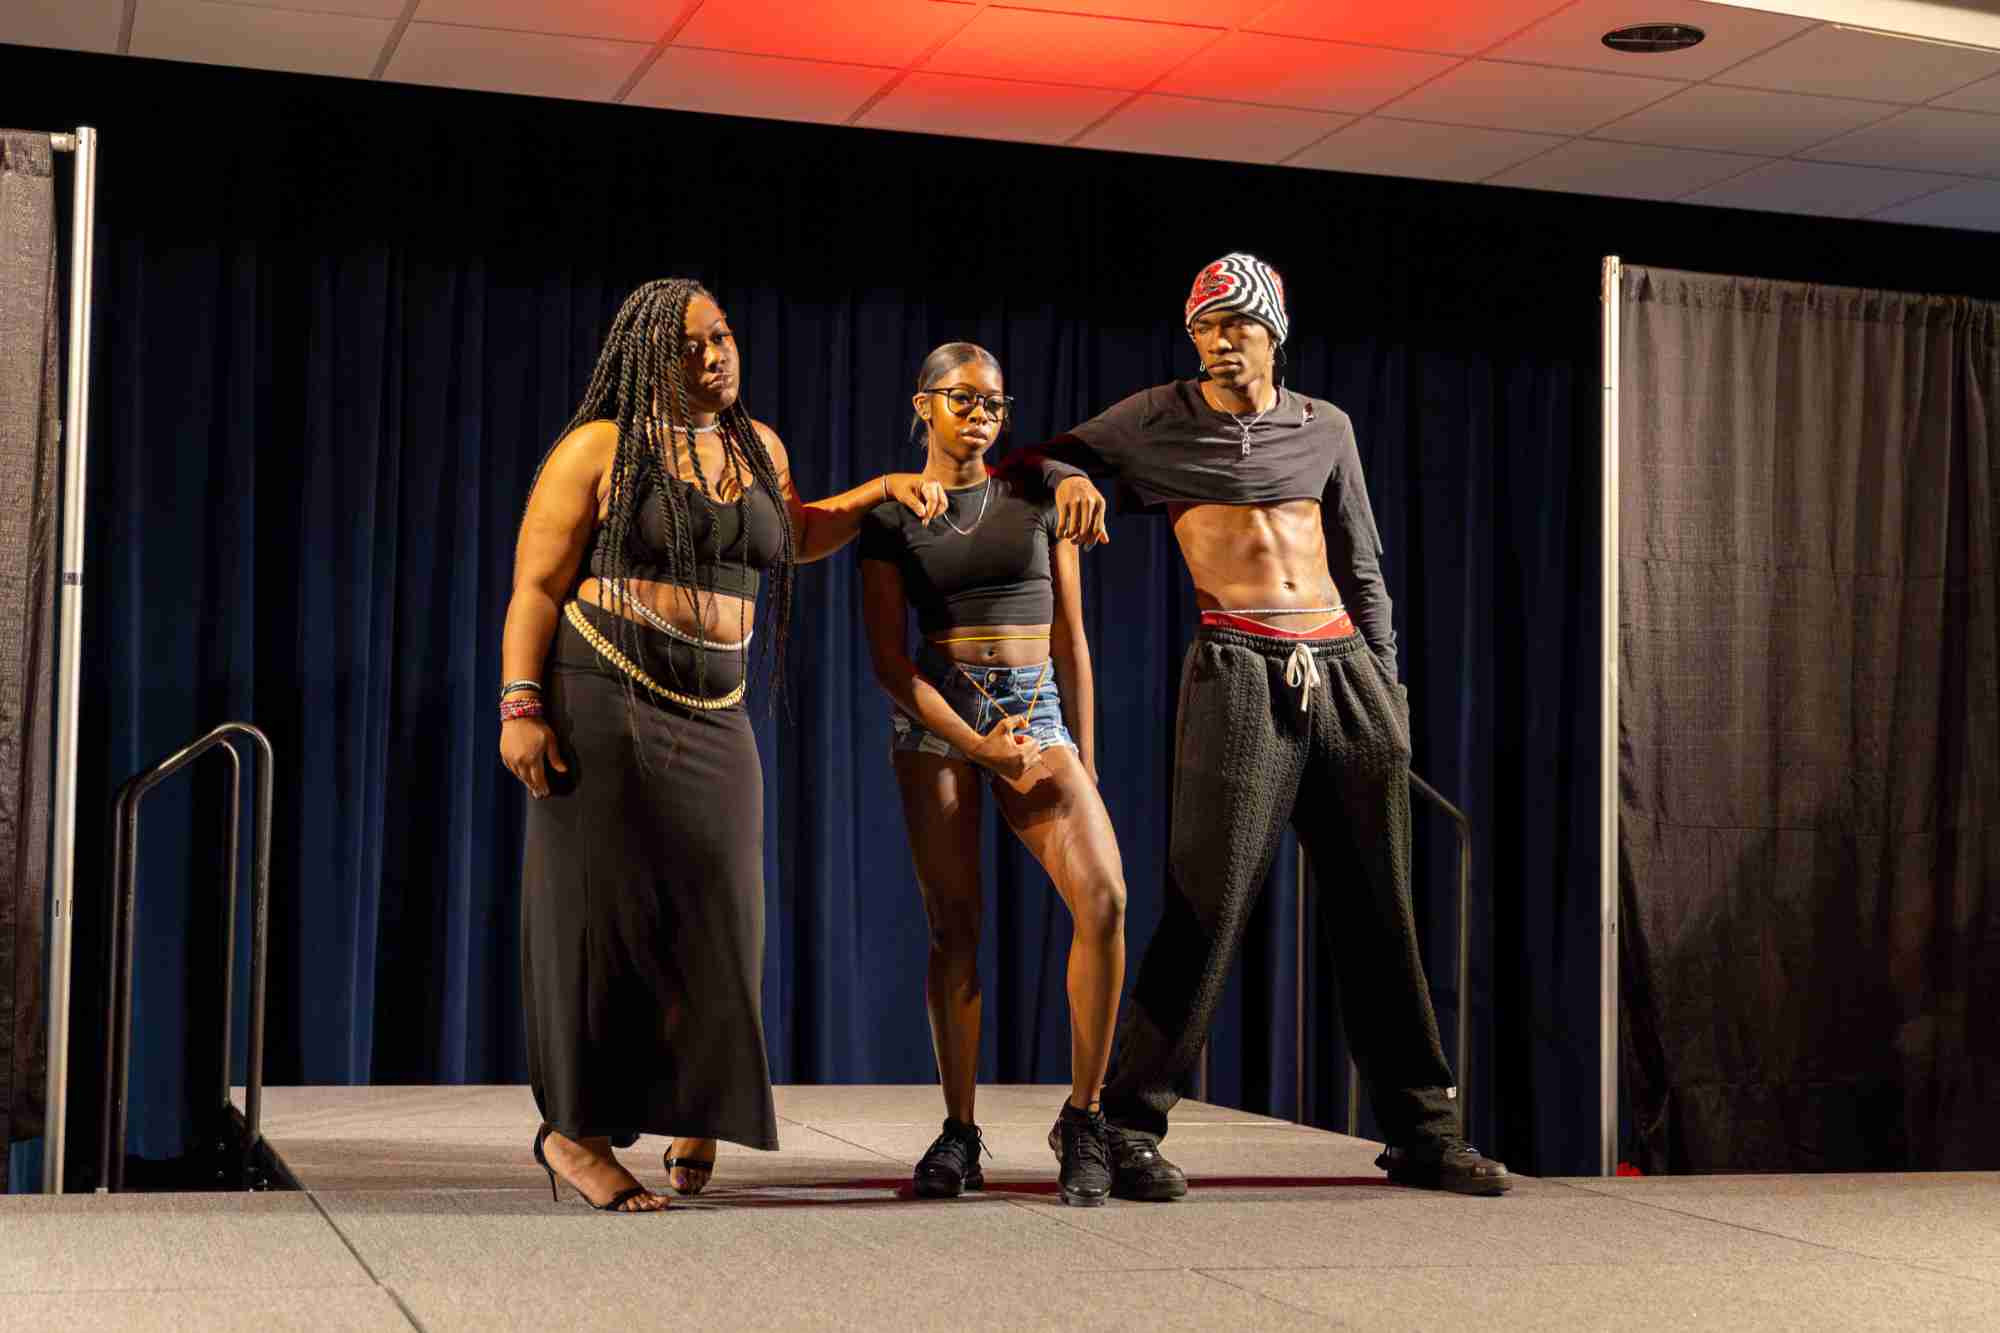 Three Model Entertainment students dressed in black posing onstage